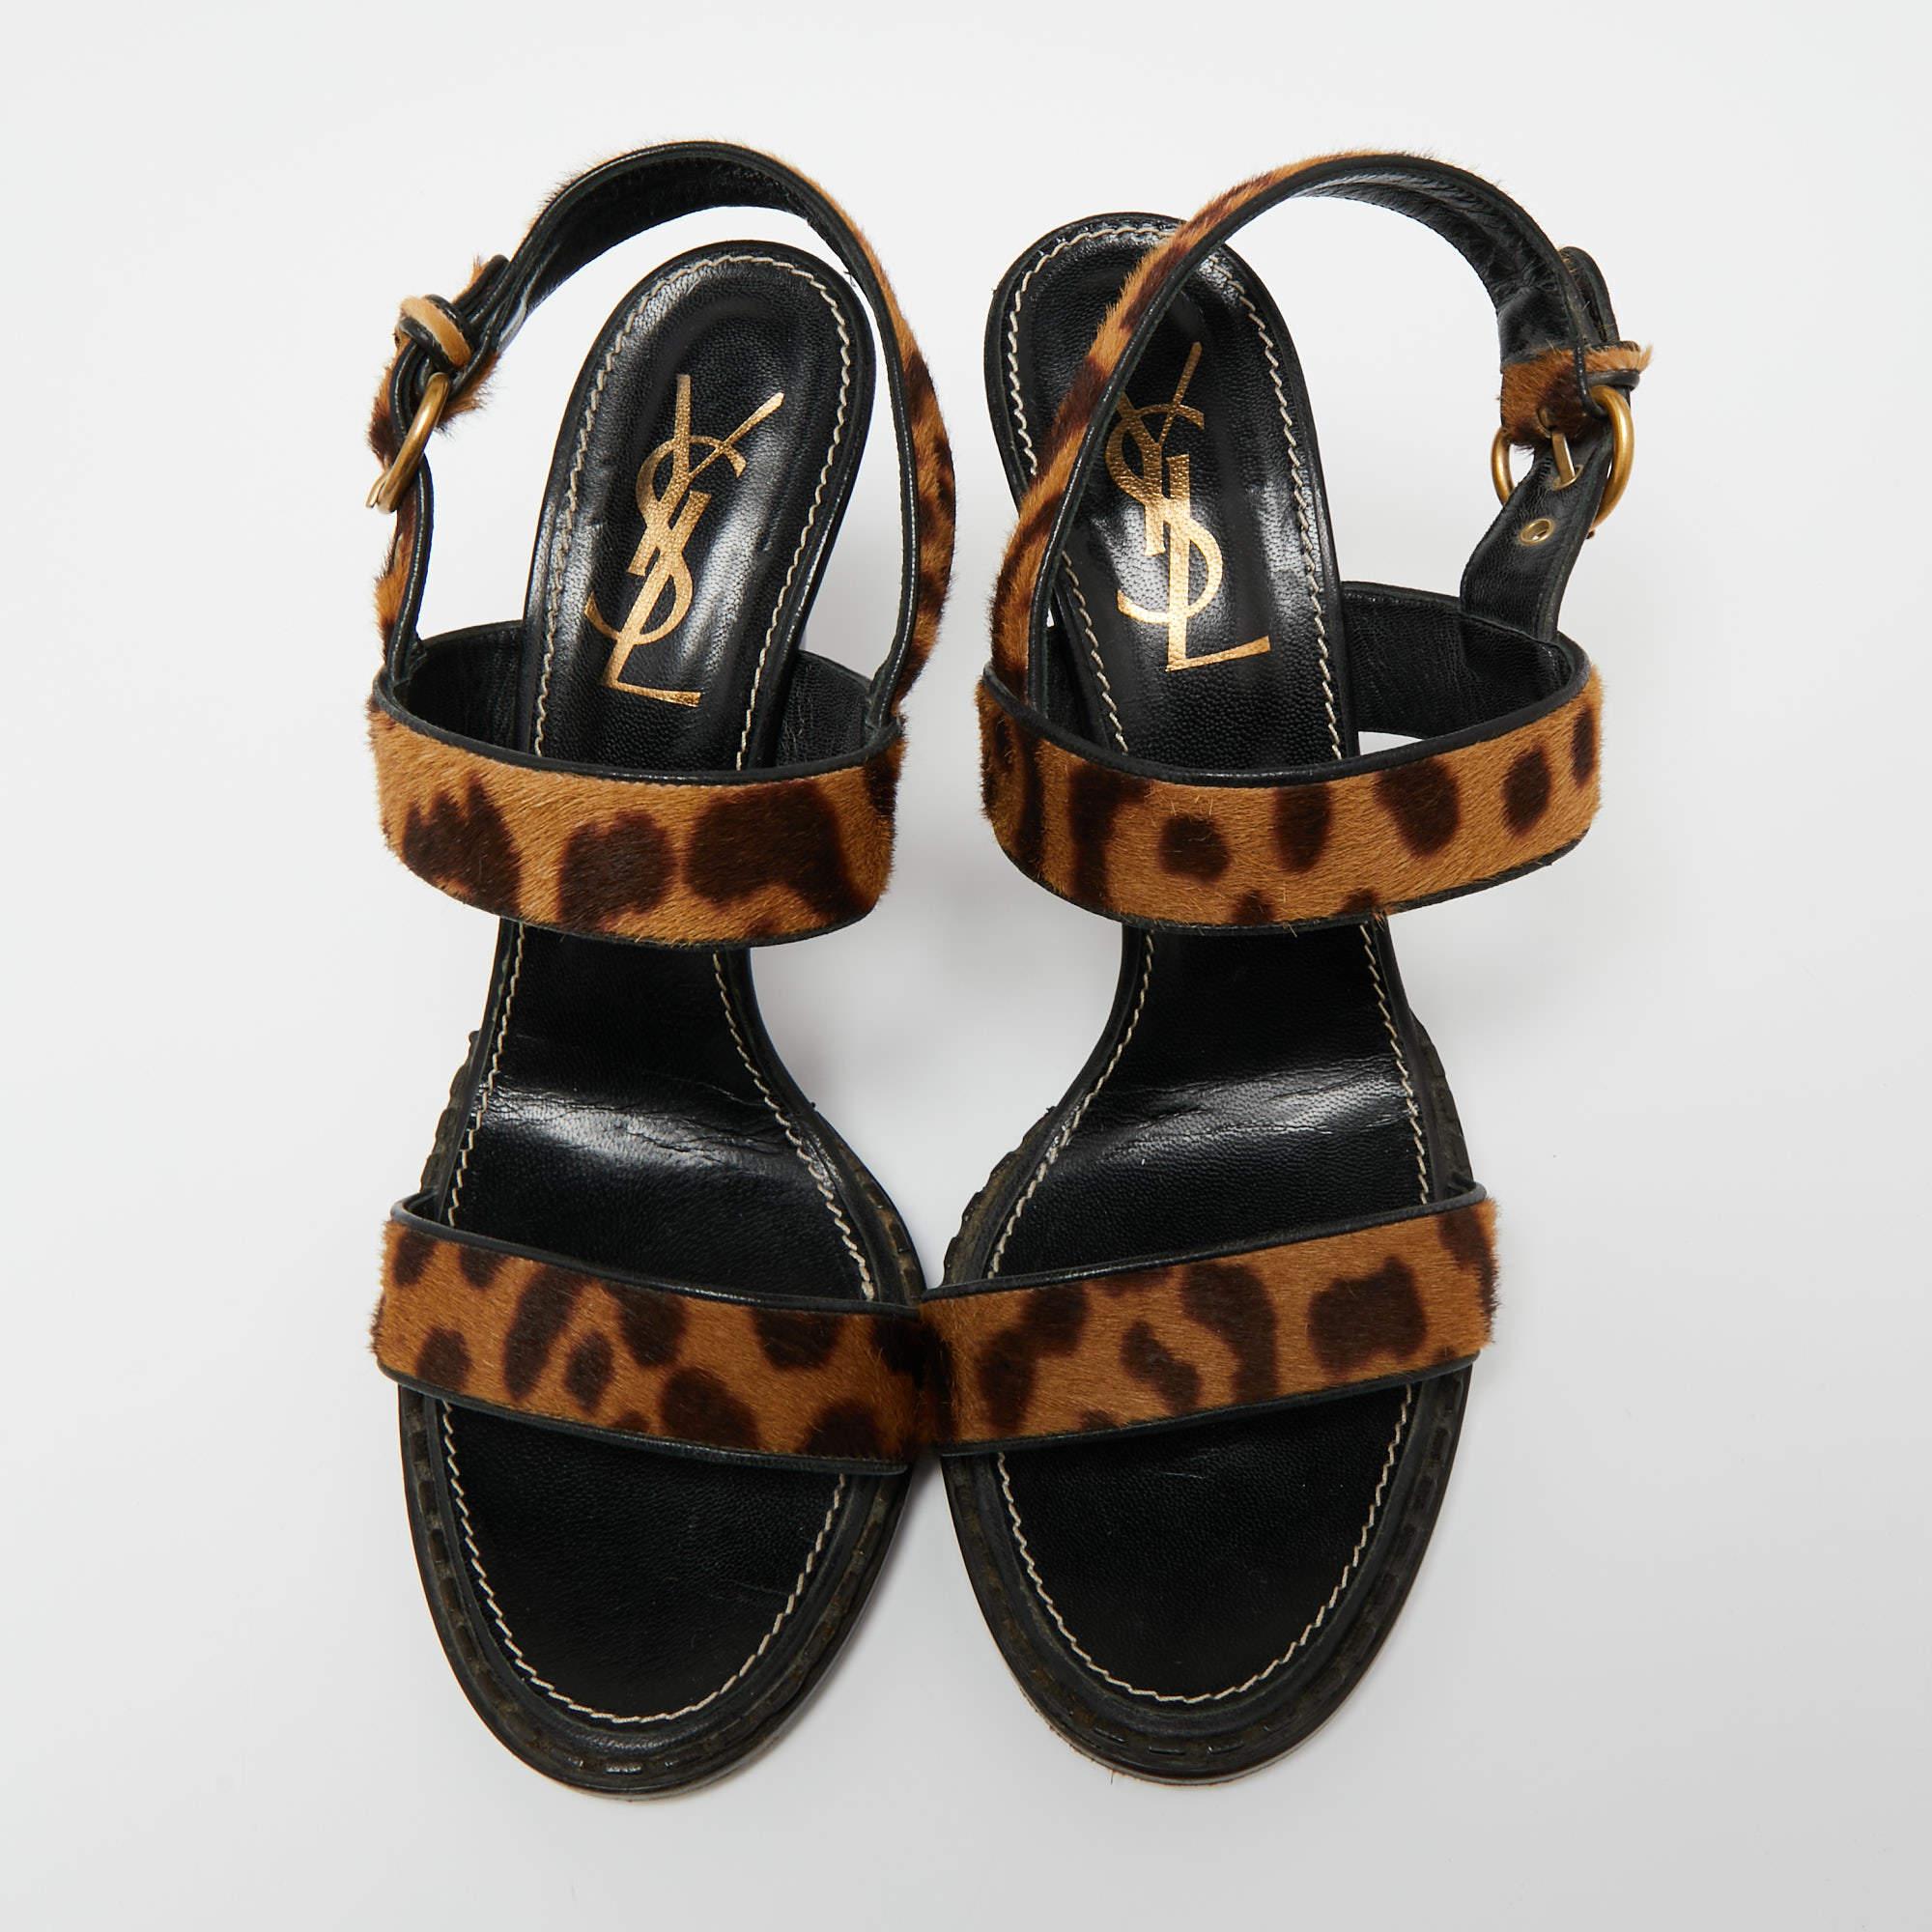 The leopard print of these Saint Laurent sandals adds to their appeal. Constructed from calf hair, they are characterized by an ankle buckle closure, a strap on the vamps, and 11cm heels.

